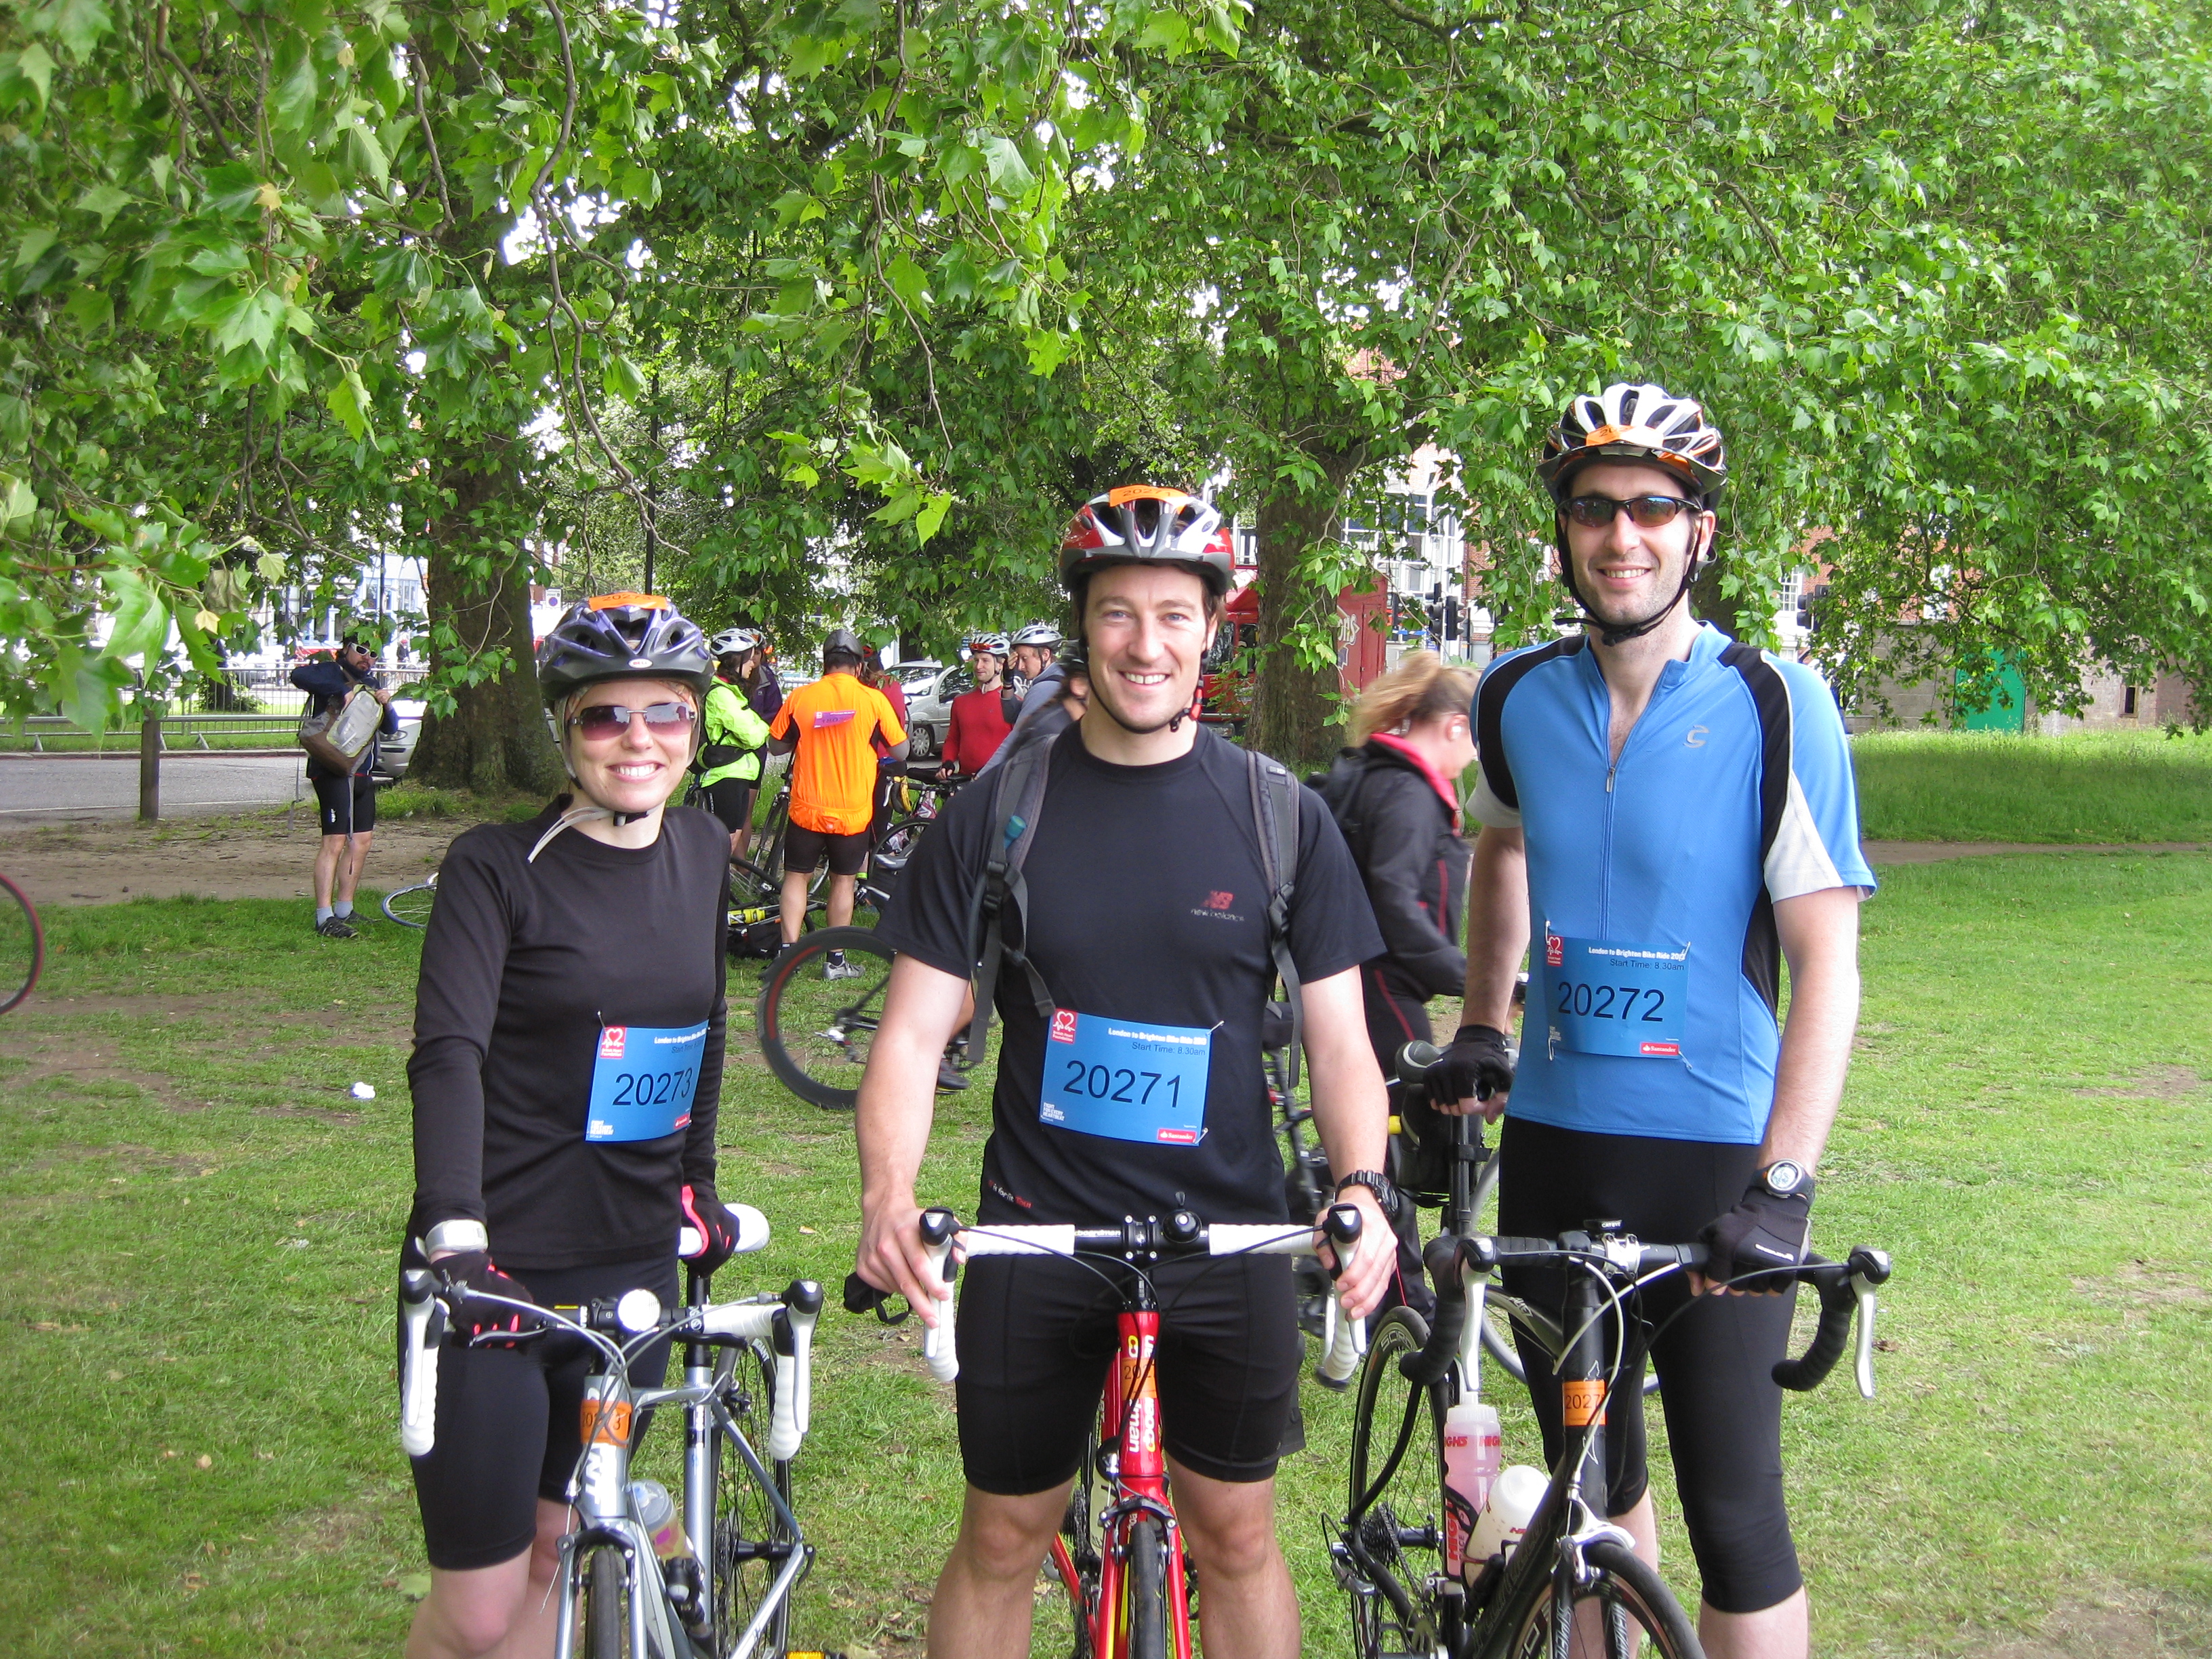 55 London To Brighton Bike Ride Helping Hearts 2013 with regard to Cycling Training Plan For London To Brighton